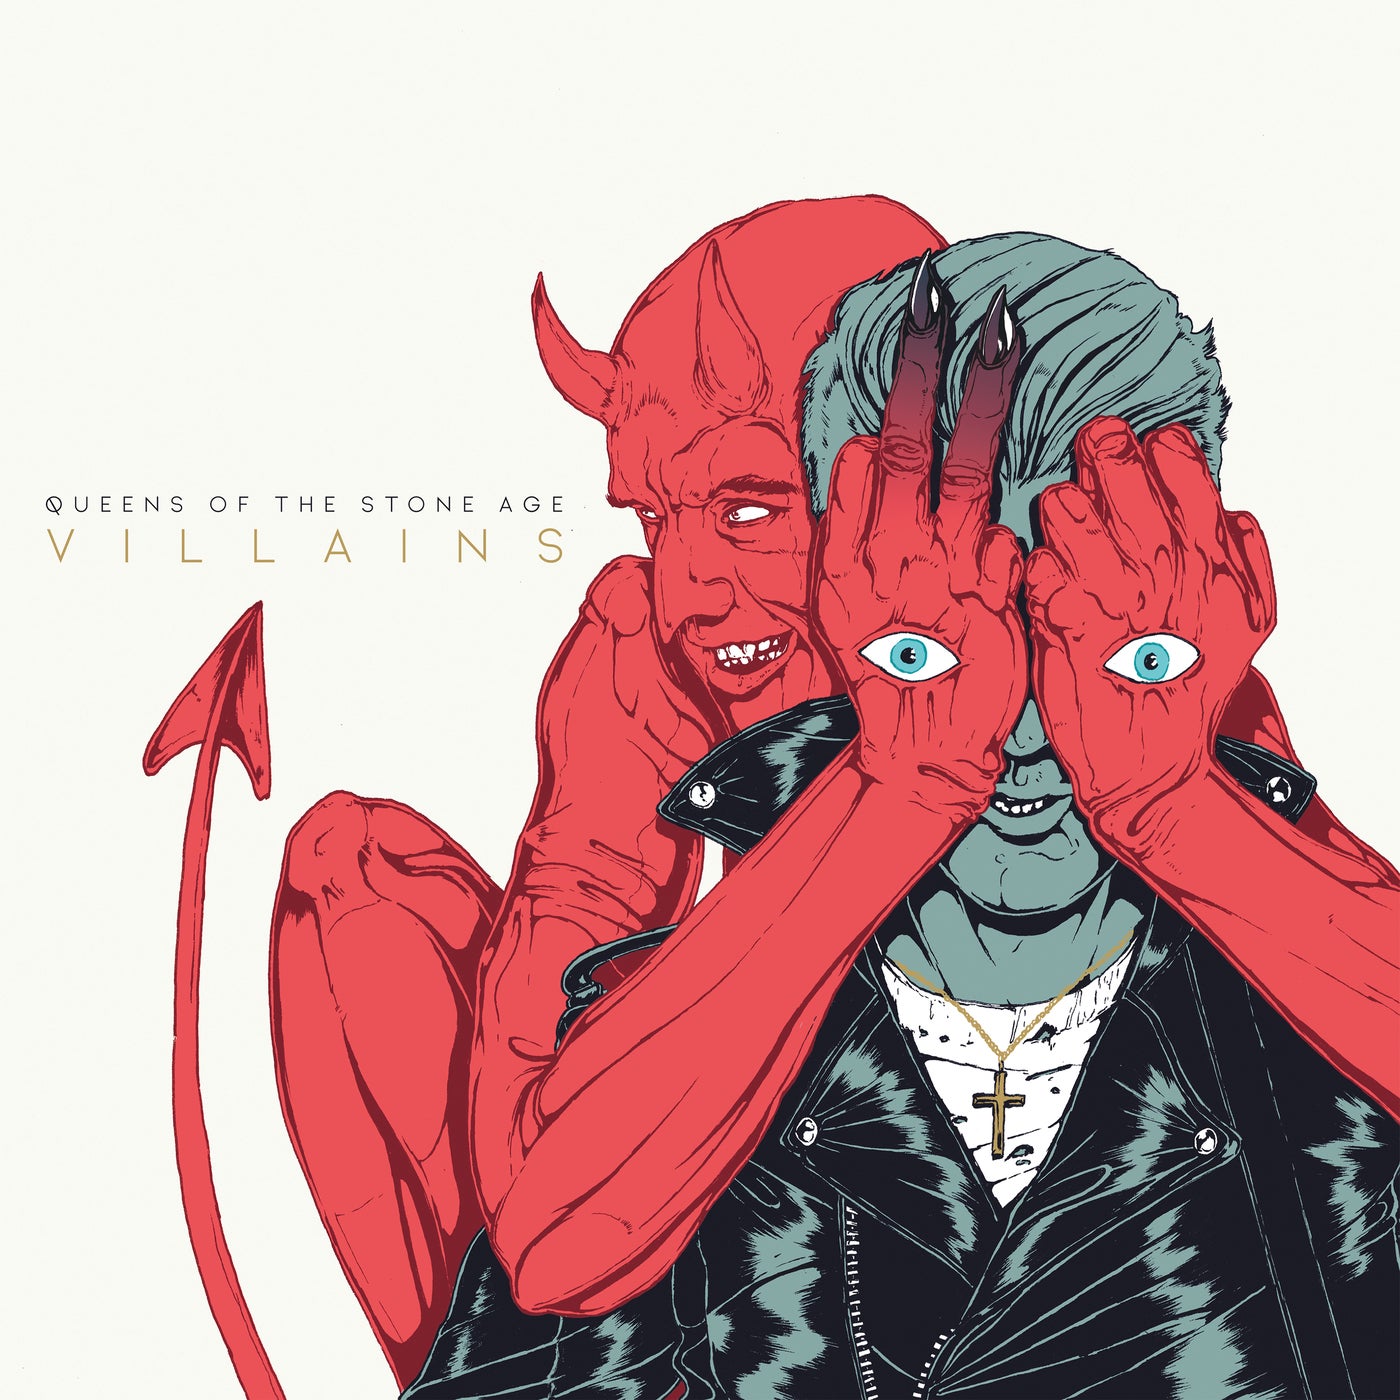 Domesticated Animals (Original Mix) by Queens Of The Stone Age on Beatport